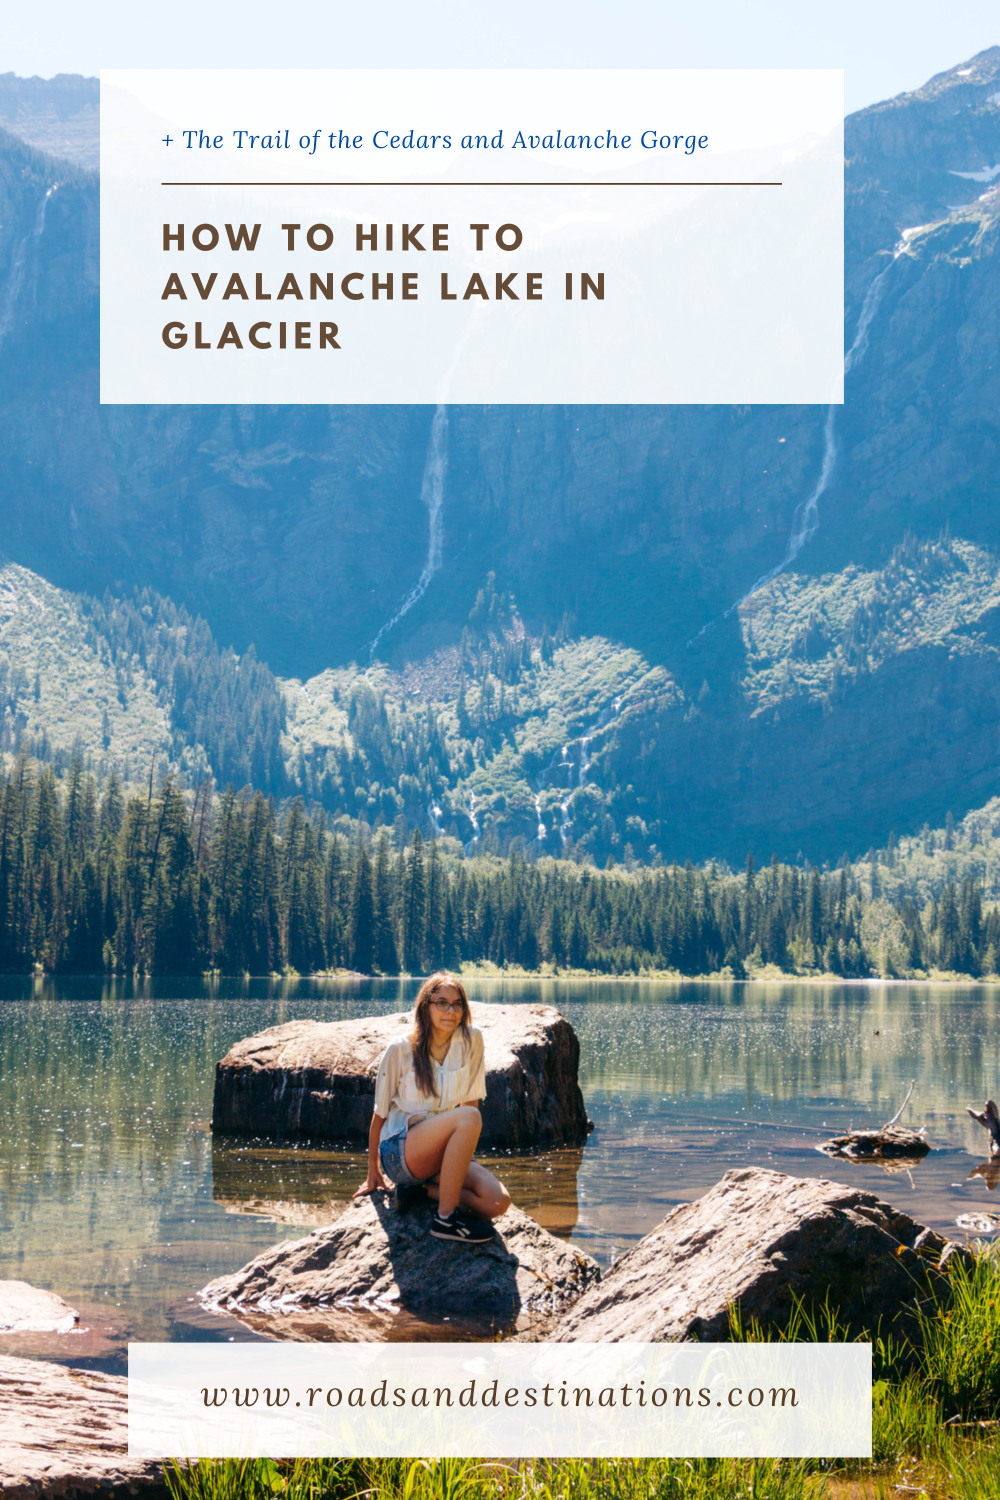 Avalanche Lake Hike via the Trail of the Cedars - Roads and Destinations